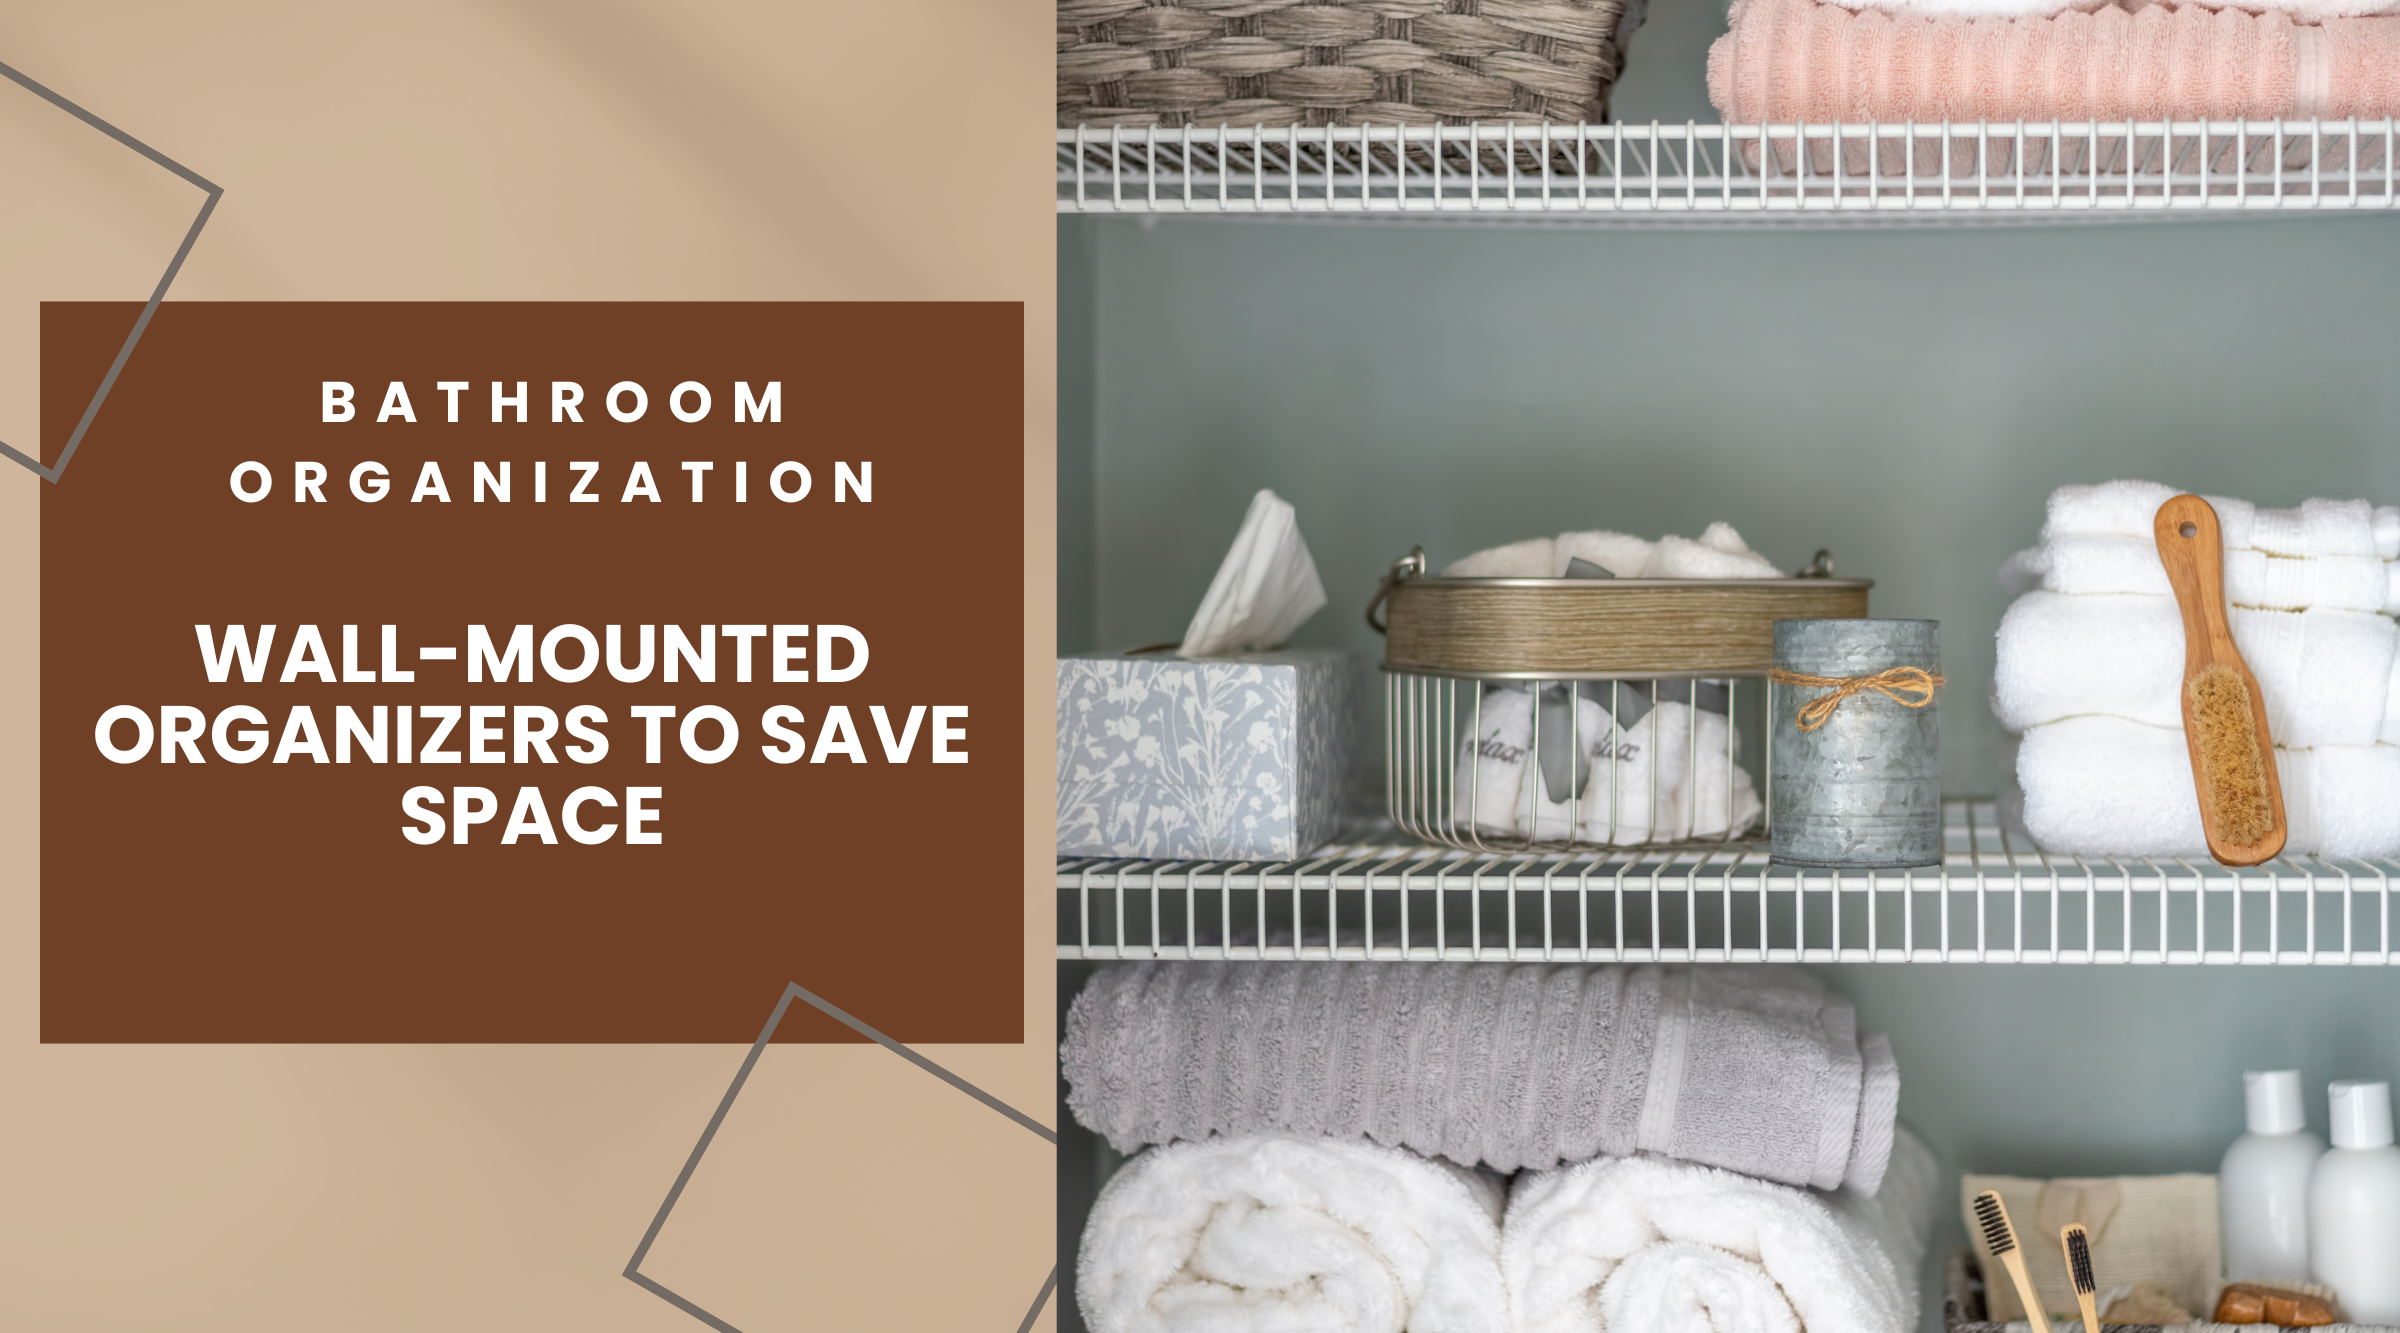 15 Small Bathroom Storage Ideas To Help Kick the Clutter! - Driven